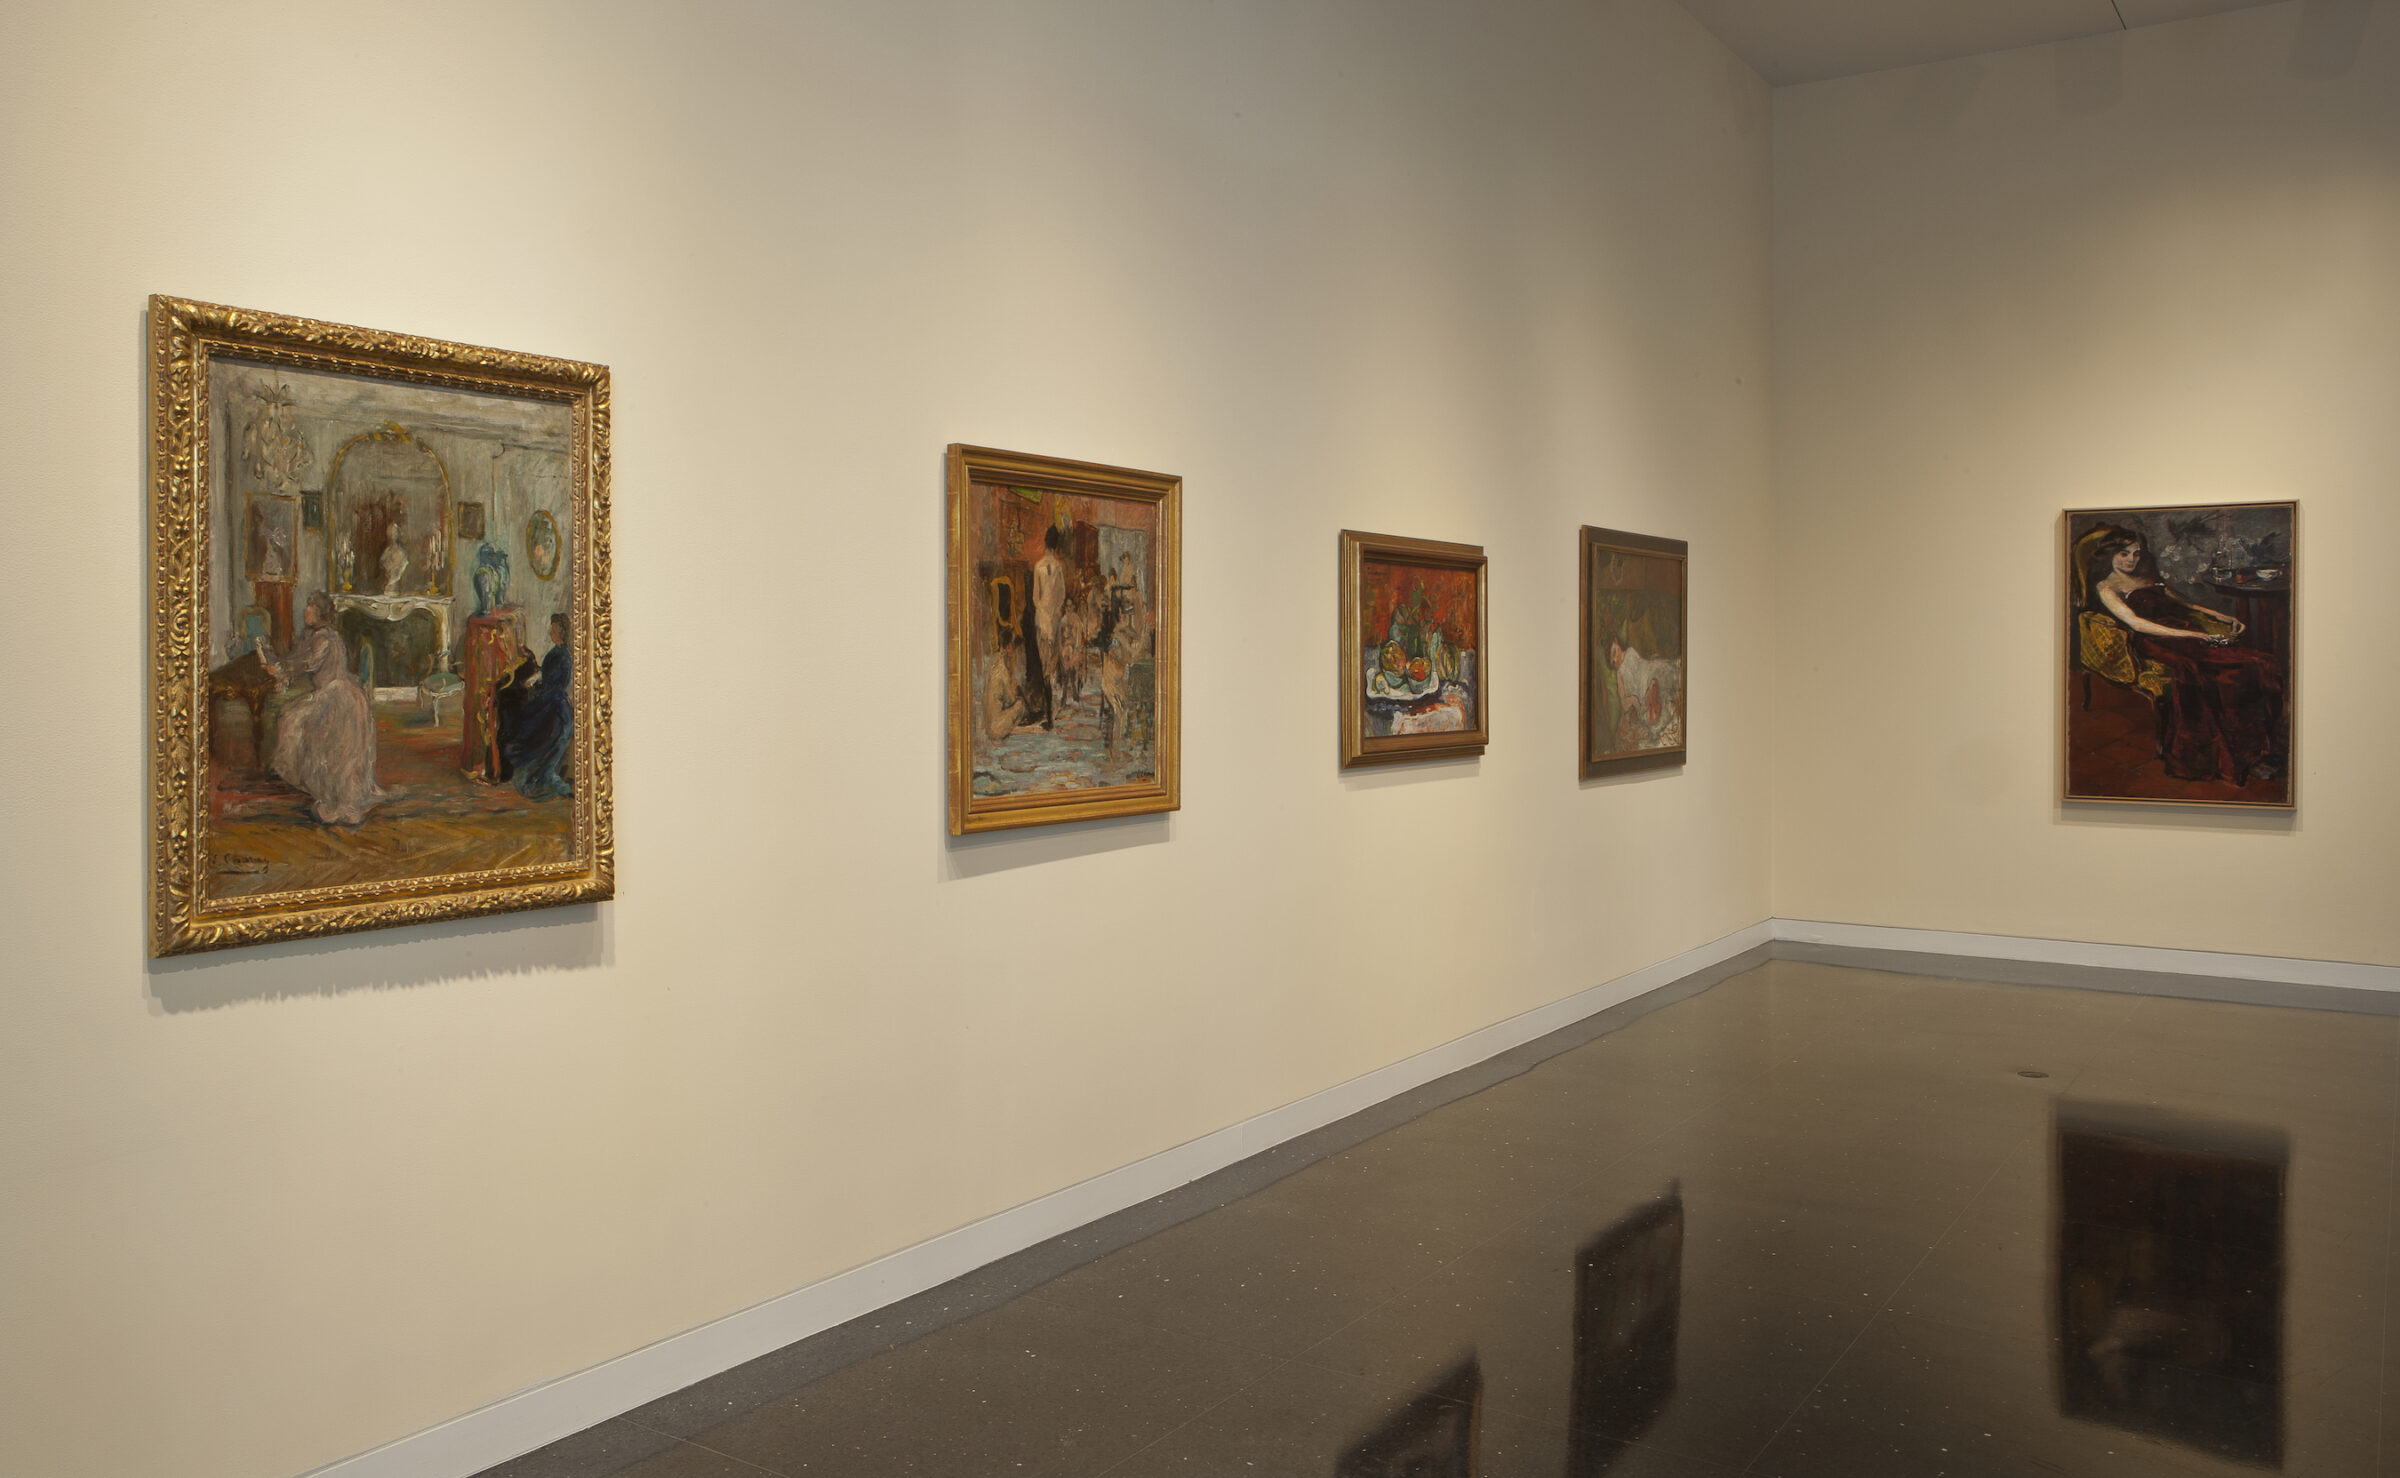 Corner of a gallery with five works hung on the walls.